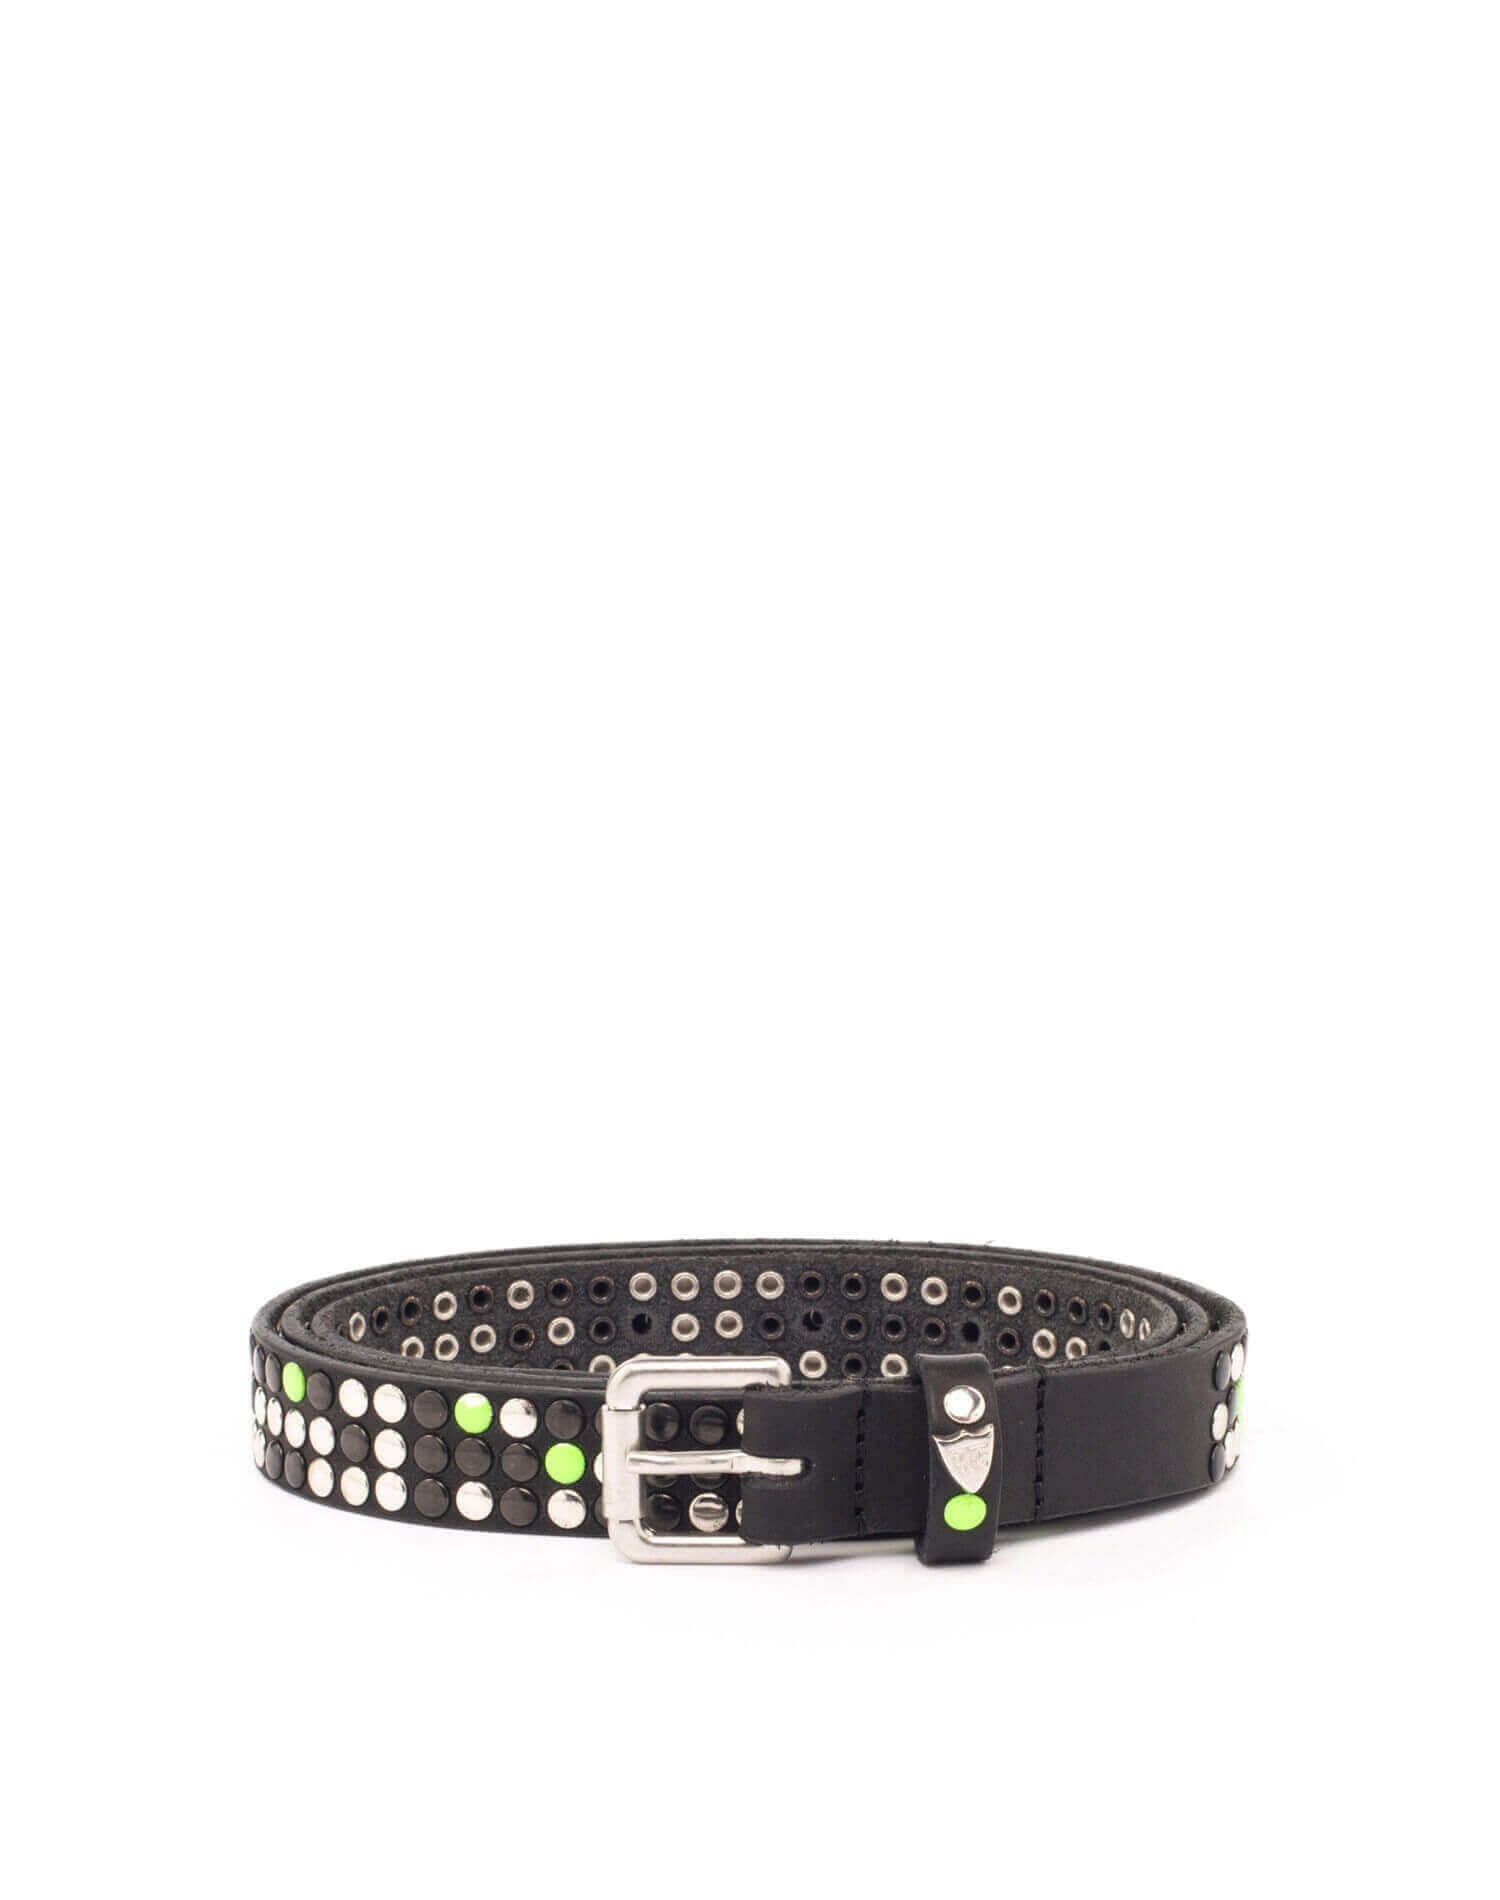 3.000 STUDS VARNISH BELT Black leather belt with studs, brass buckle, studded zamac belt loop and rivet with HTC logo. Height: 2 cm. Made in Italy. HTC LOS ANGELES